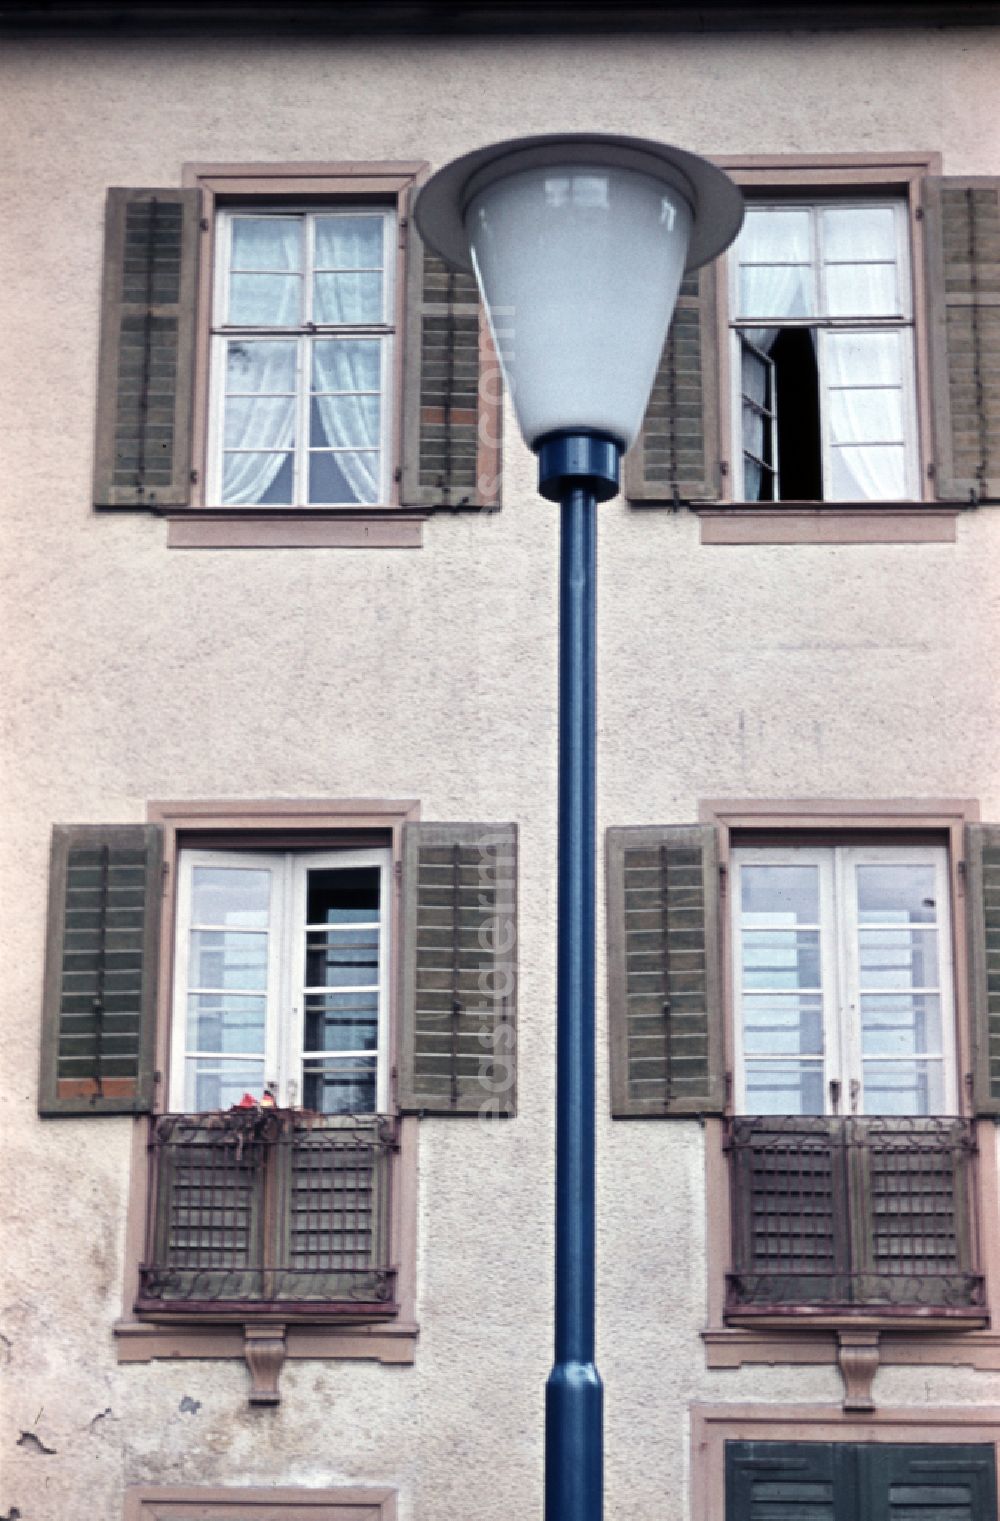 GDR picture archive: Bad Lobenstein - House facade with windows and street lamp in Bad Lobenstein, Thuringia in the area of the former GDR, German Democratic Republic